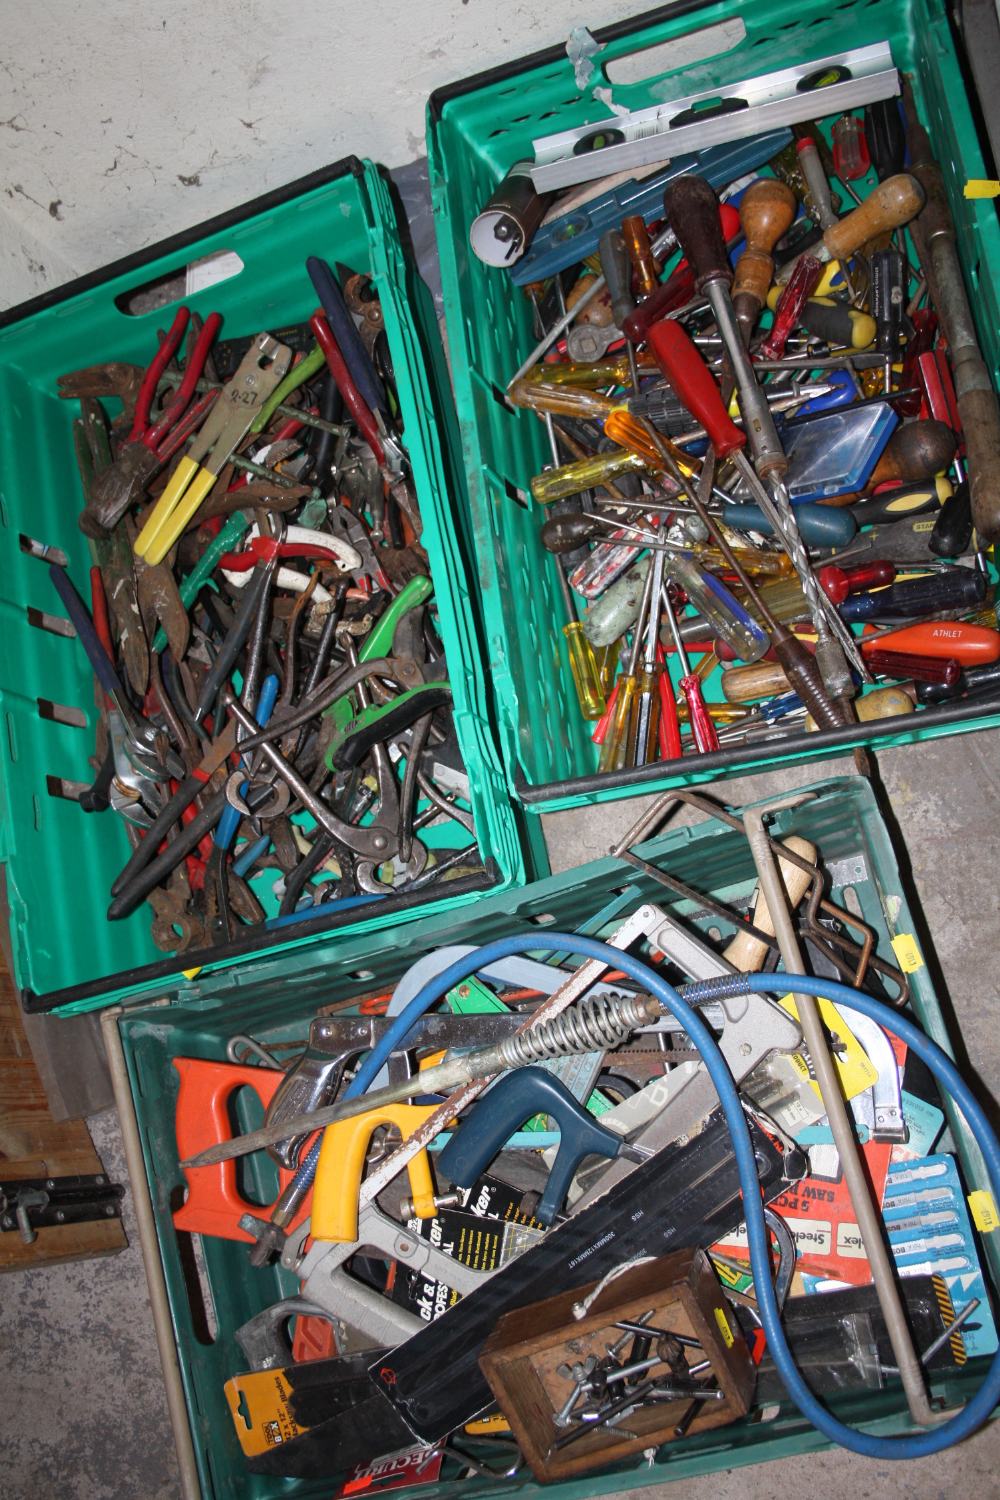 THREE TRAYS OF HANDTOOLS TO INCLUDE MOSTLY PLIERS AND SCREWDRIVERS PLUS TWO CAR RAMPS (PLASTIC TRAYS